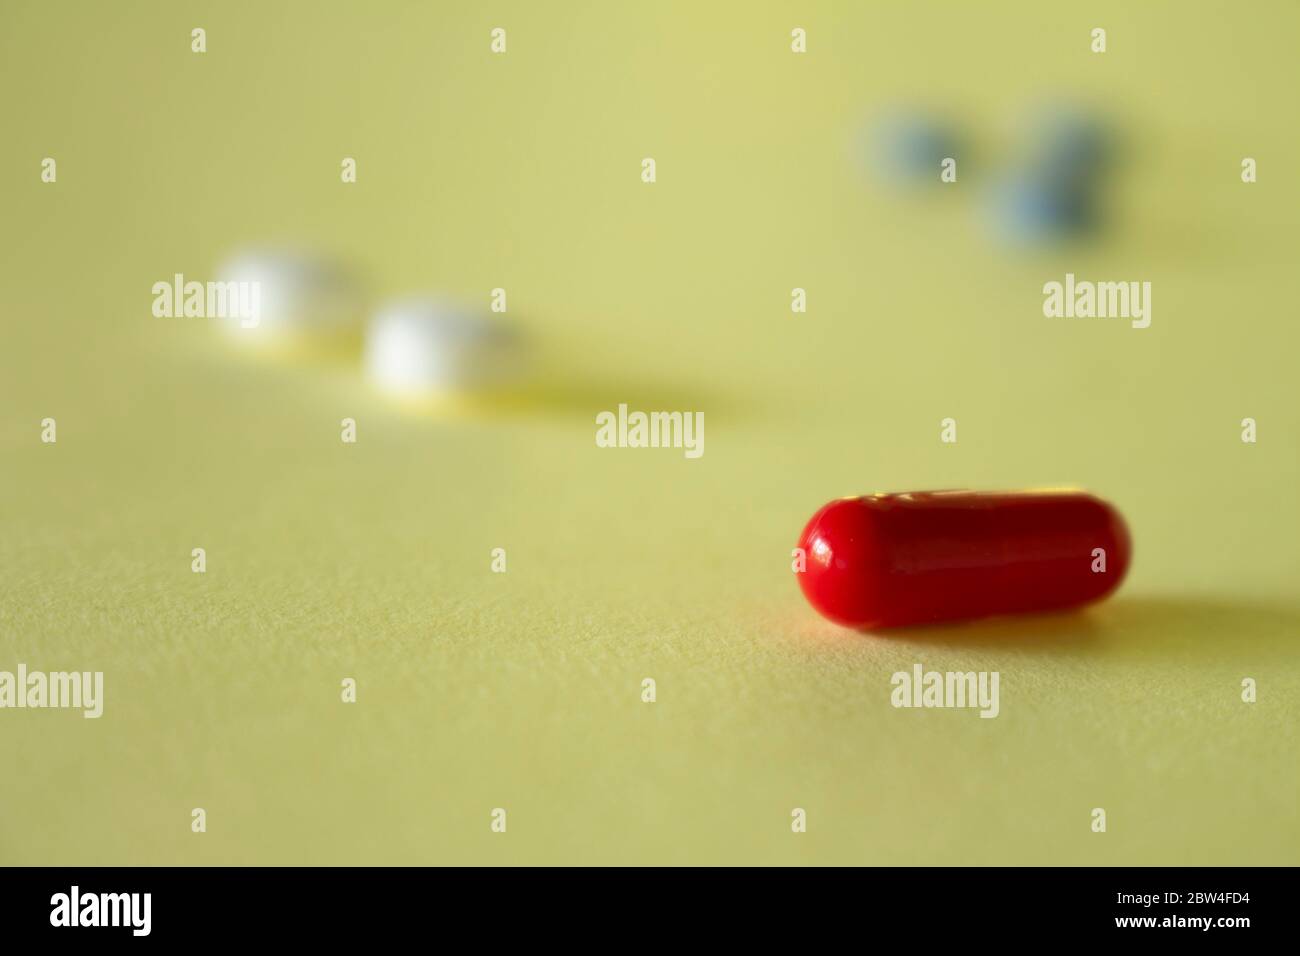 Medications with drugs for medical treatments. Medicines for legal use in humans. Stock Photo